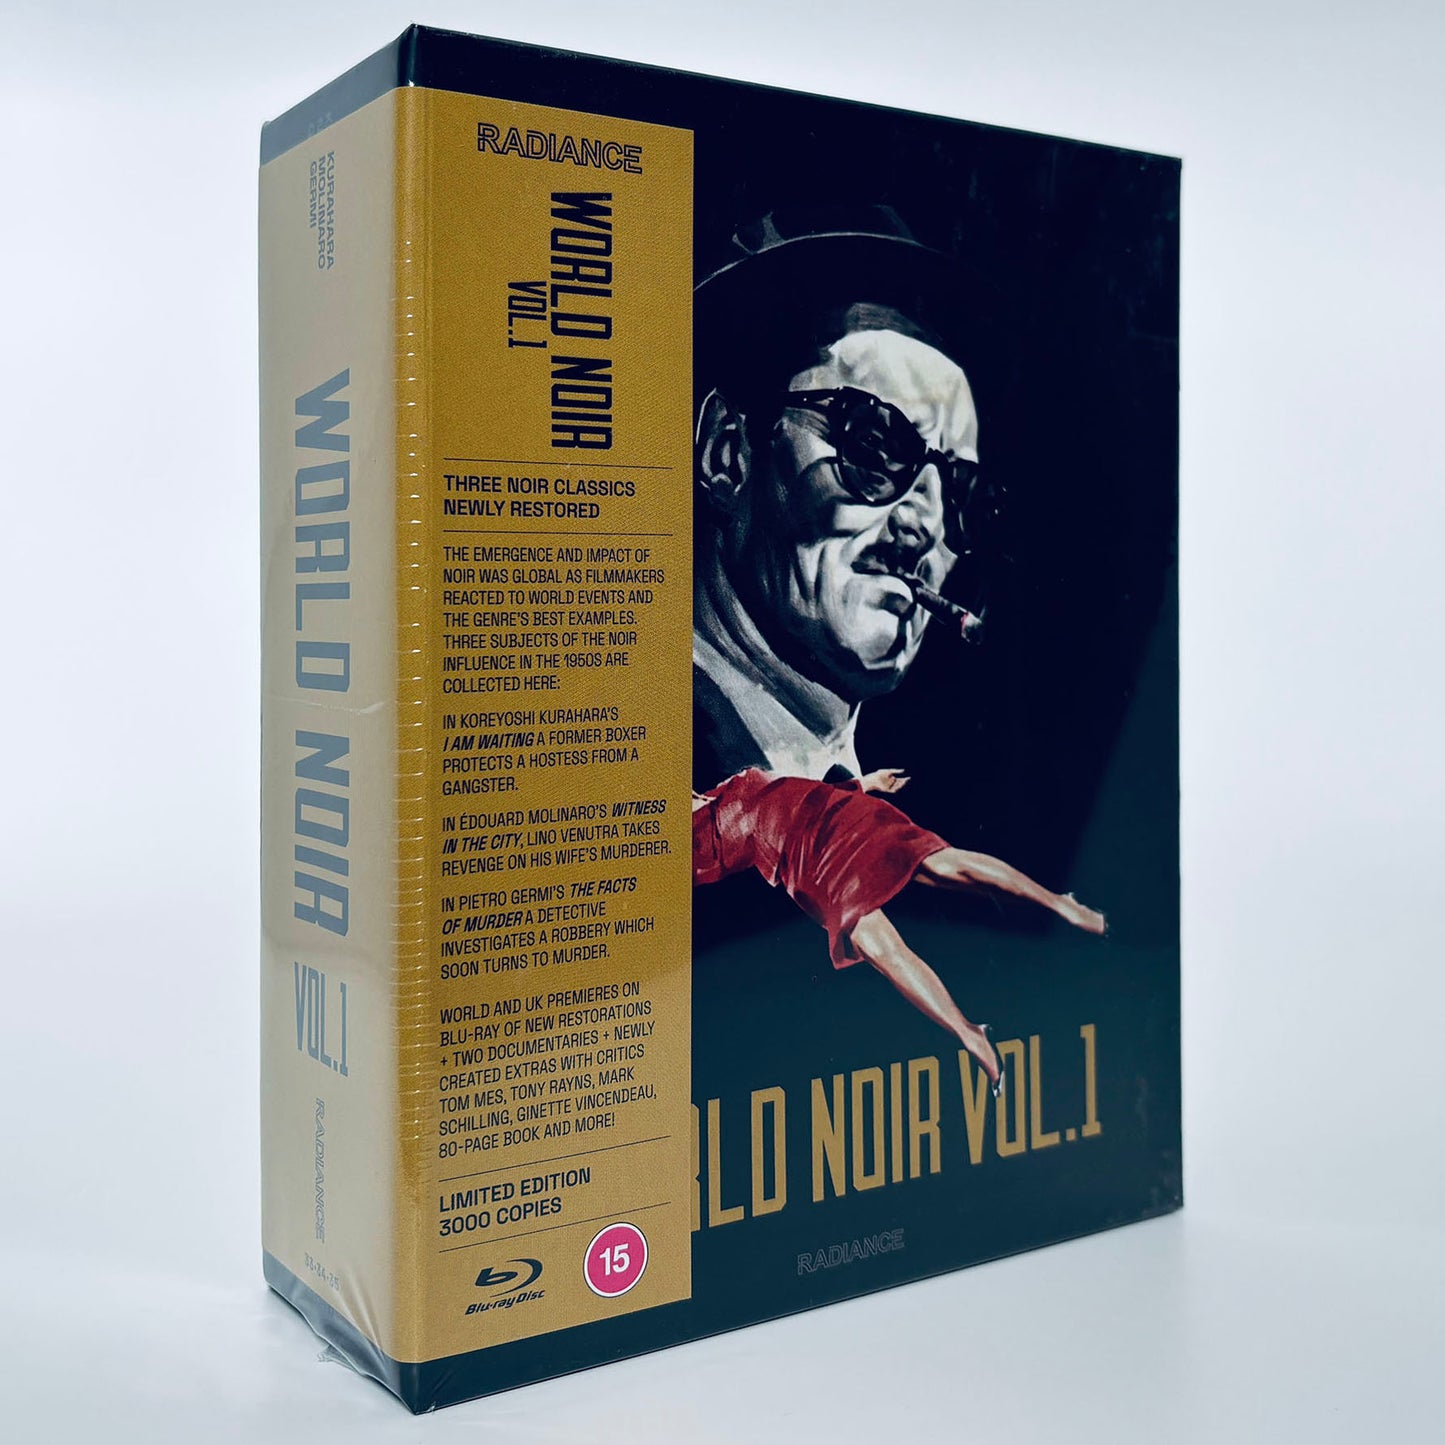 World Noir Vol 1 I Am Waiting Witness in the City Facts of Murder Volume One I Blu-ray Radiance